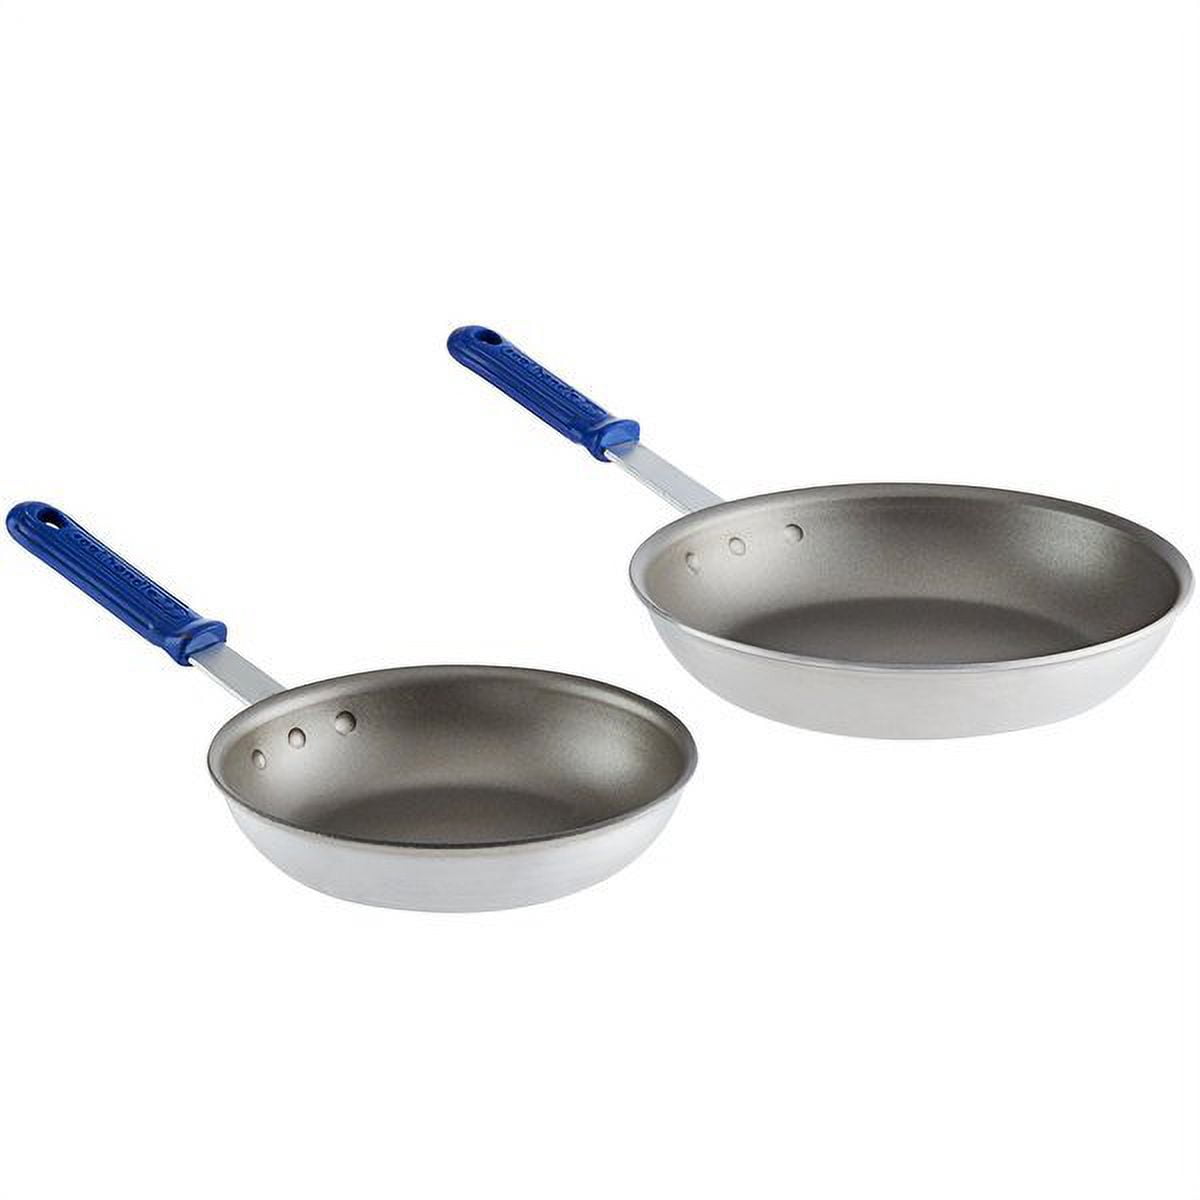 Vollrath Wear-Ever 2-Piece Aluminum Fry Pan Set with Rivetless Interior and  Blue Cool Handles - 8 and 10 Frying Pans